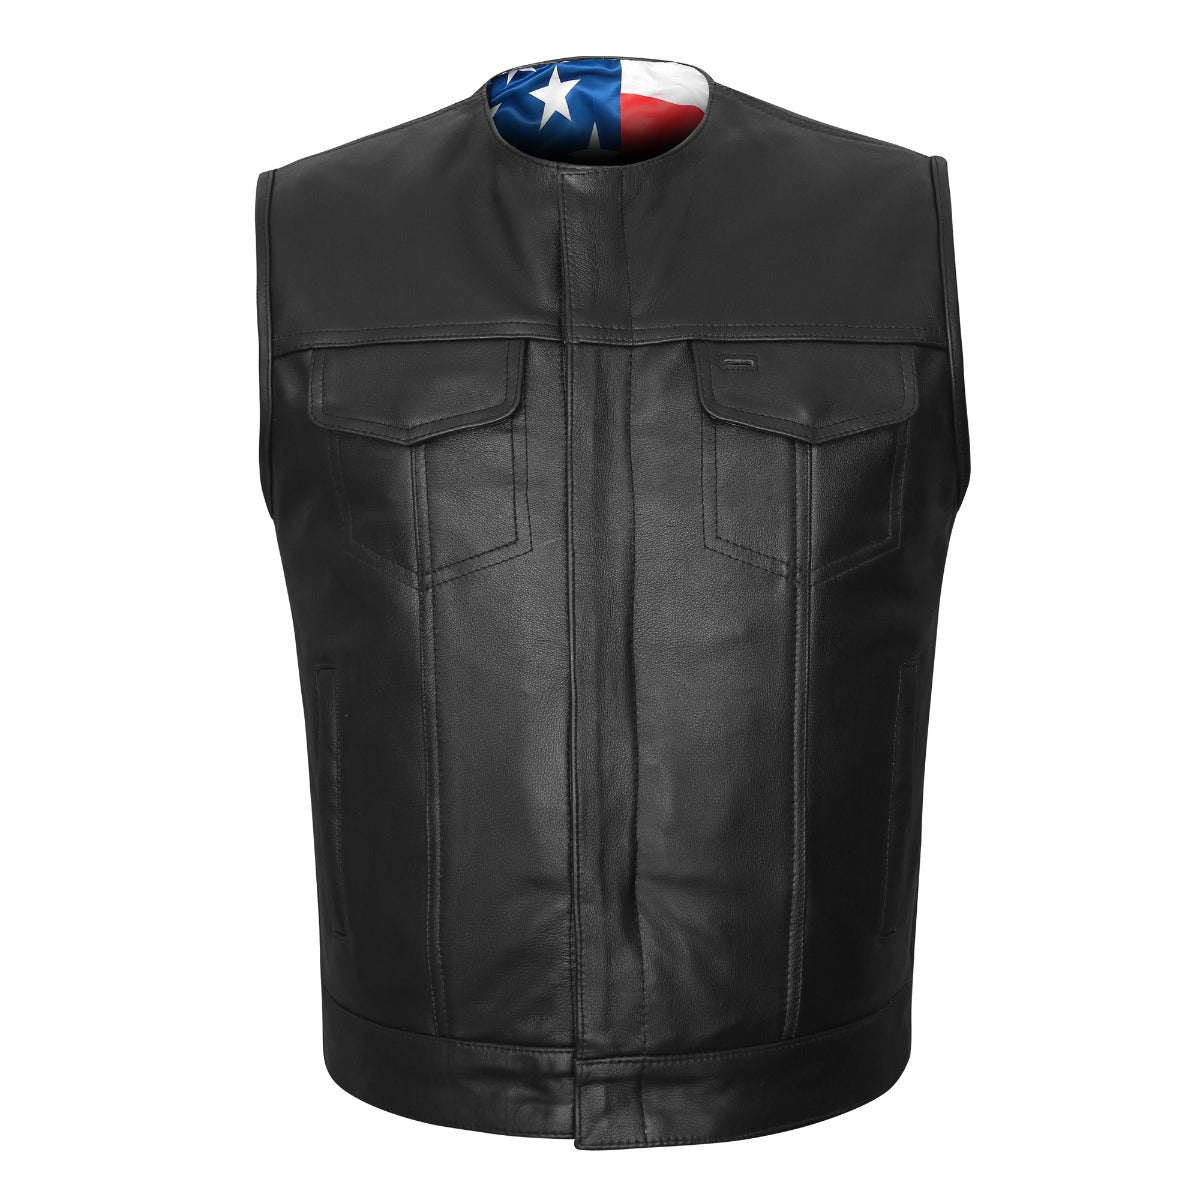 Vance Leather High Mileage Men's Collarless Leather Club Vest w/American Flag Liner